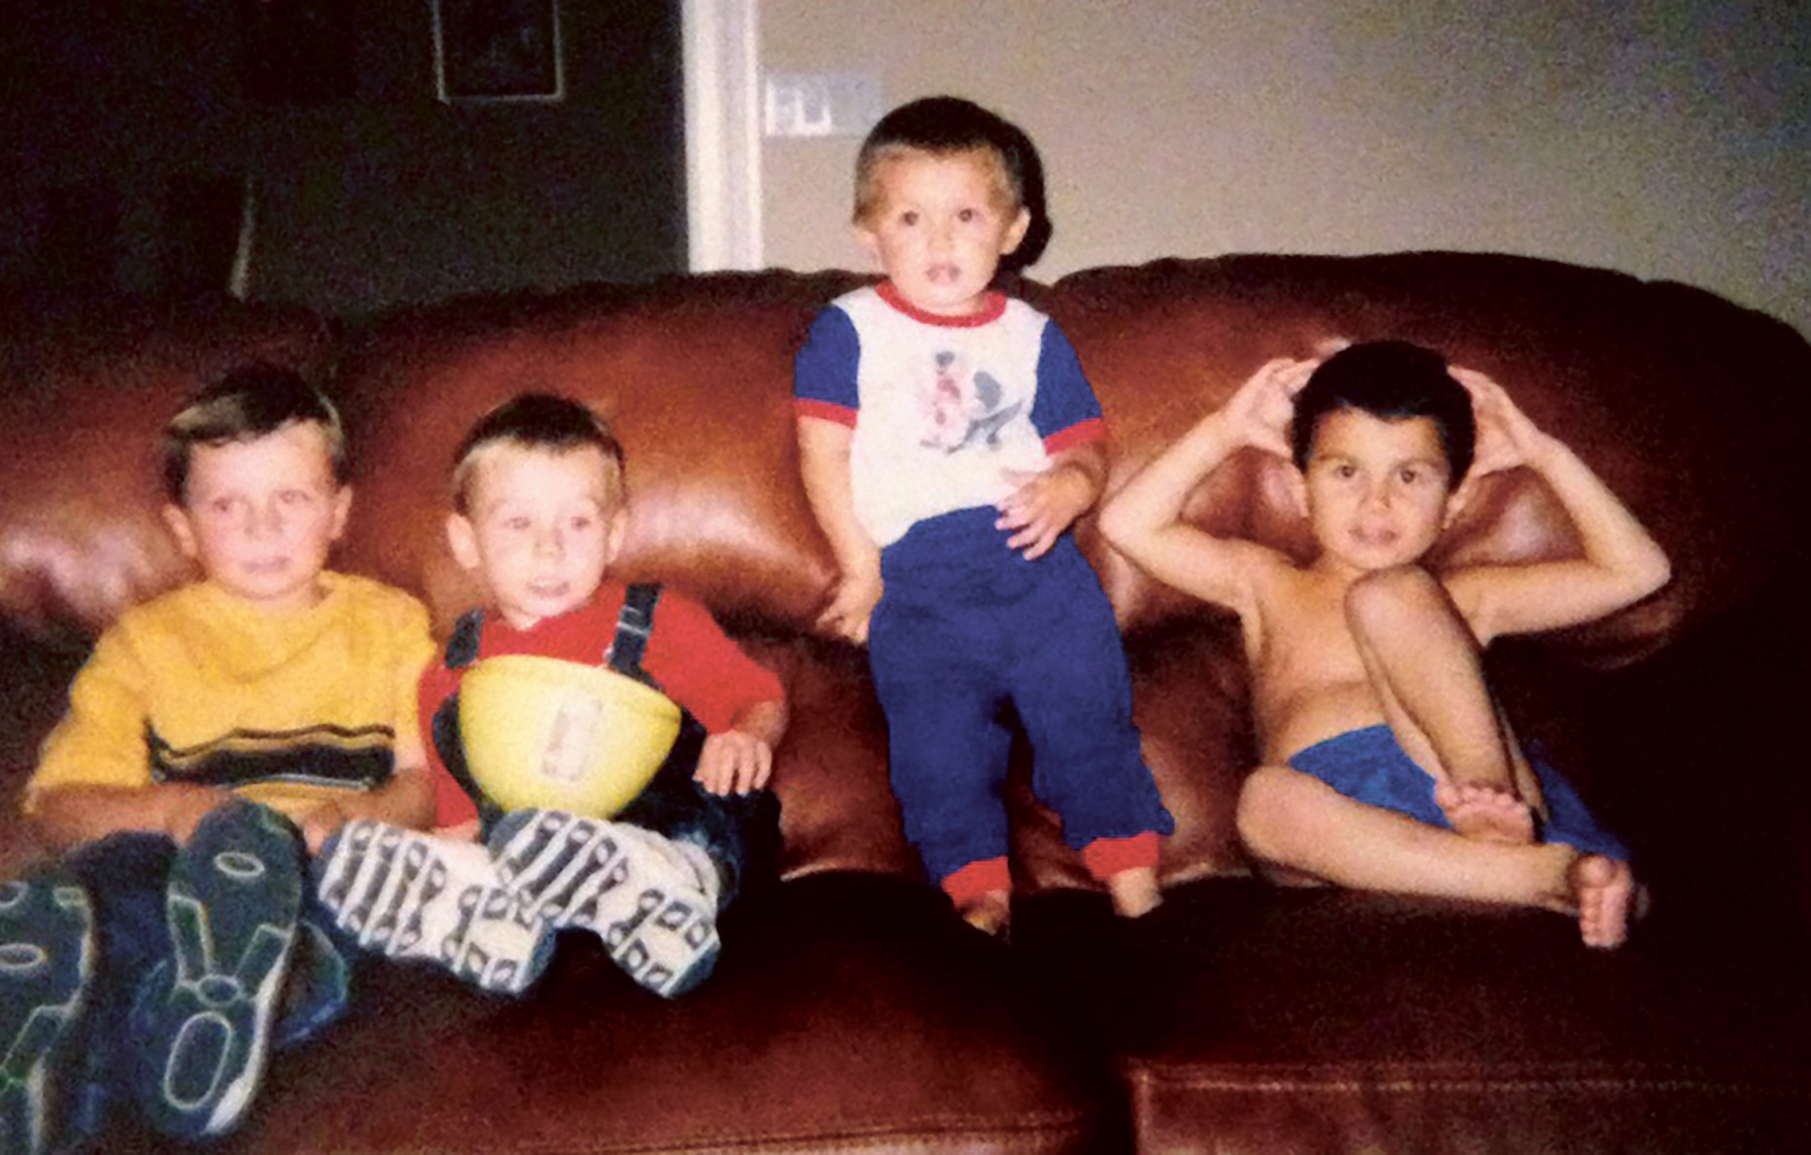 Daniel Luette, left, Robert Luette, Sam Malaussena and Zach Malaussena were hanging out on the couch as kids long before they were teammates at West Orange High. Courtesy photo.